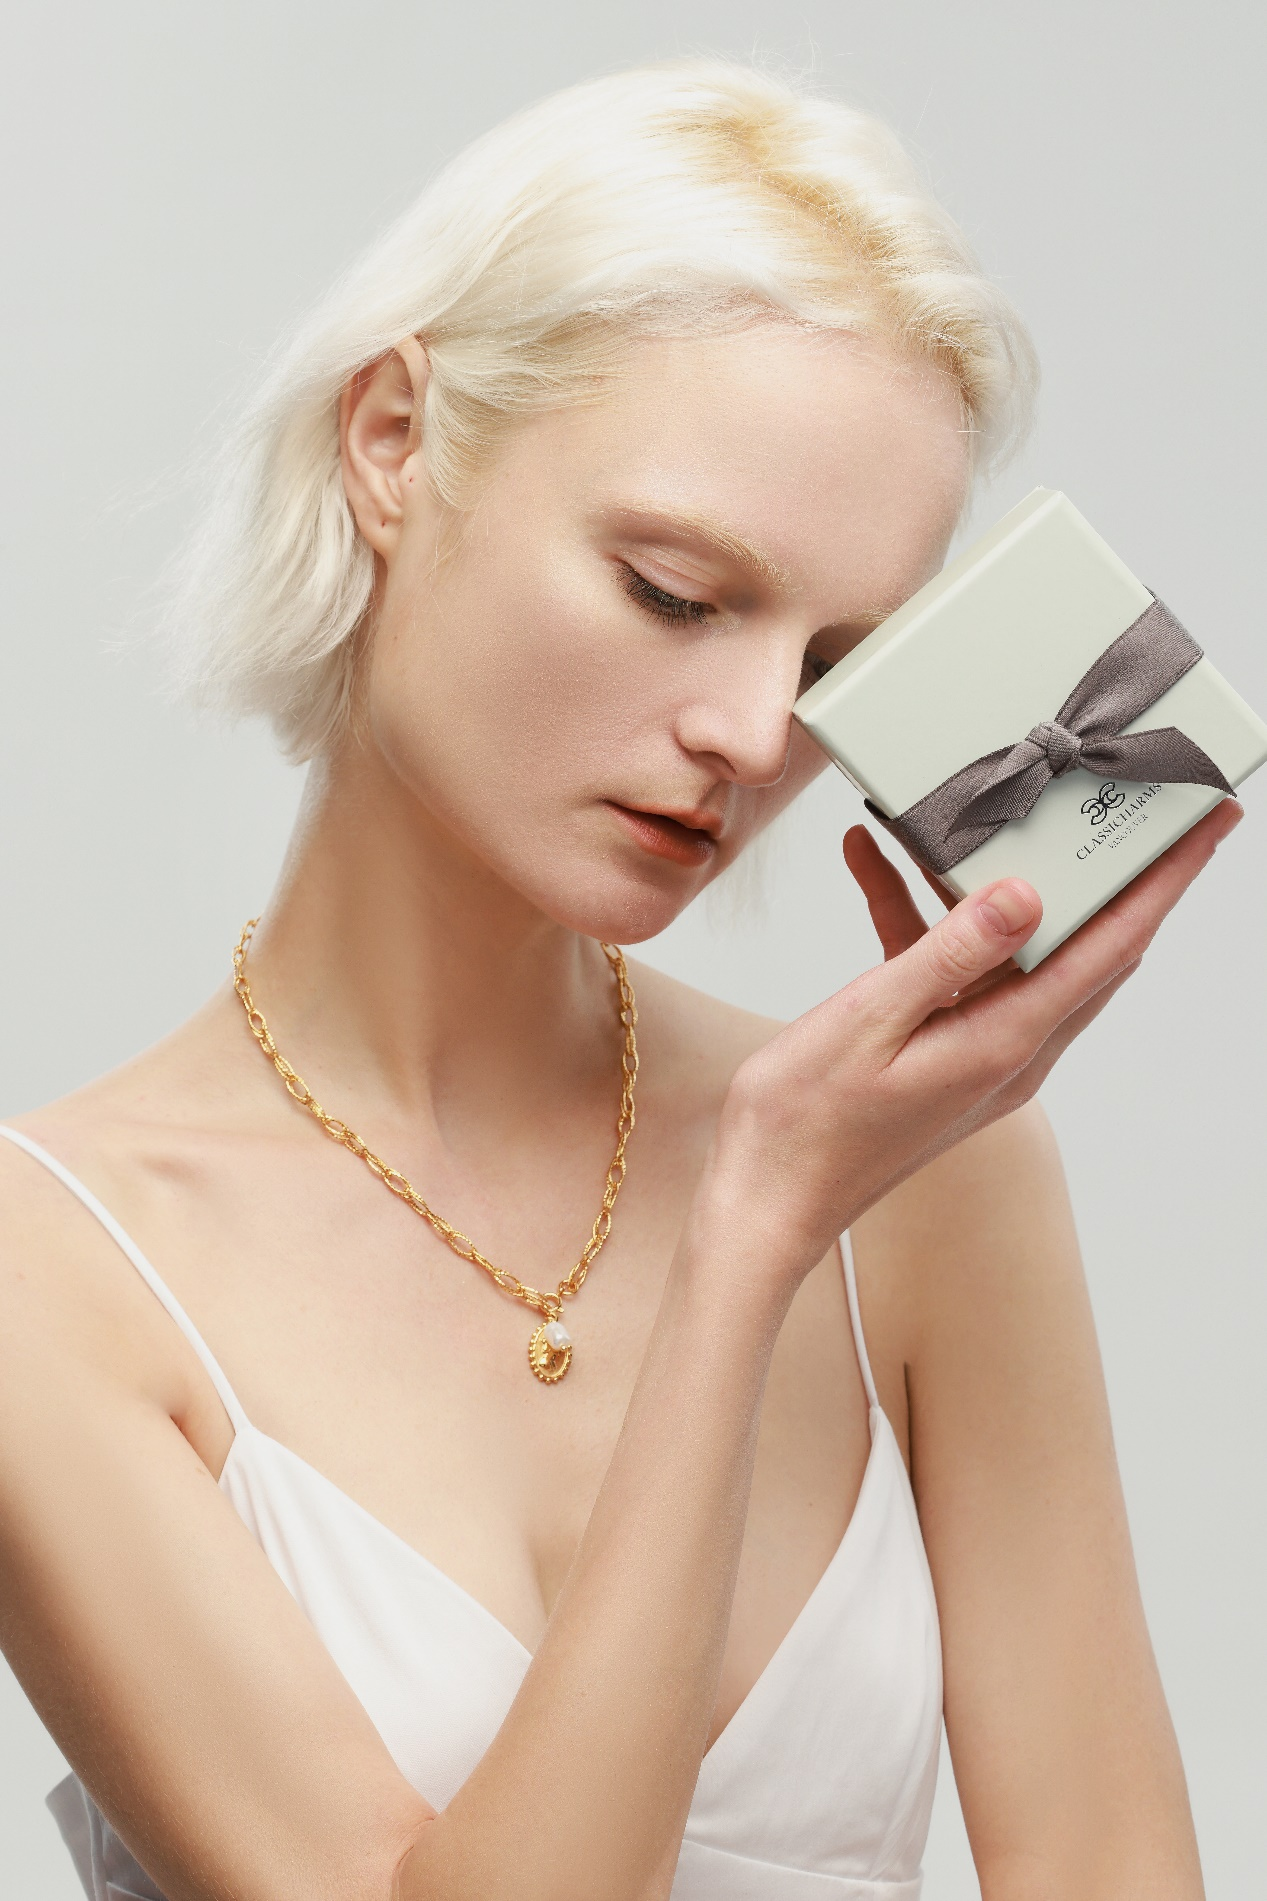 Classicharms Introduces Simple Jewelry Designs For That Polished and Refined Look